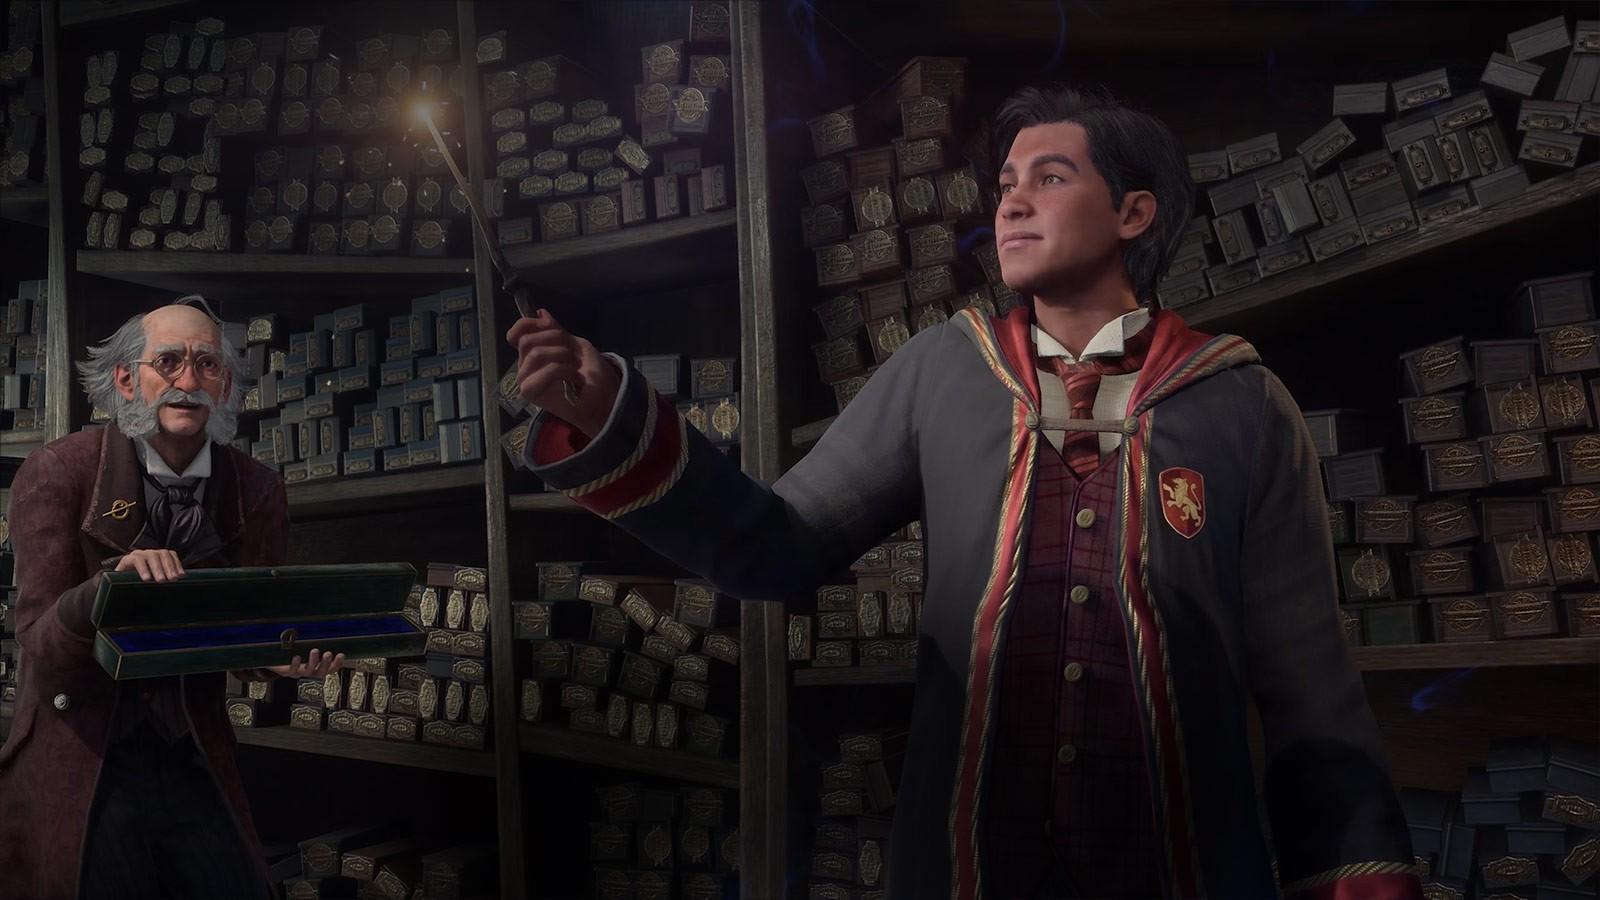 A promotional image from Hogwarts Legacy.